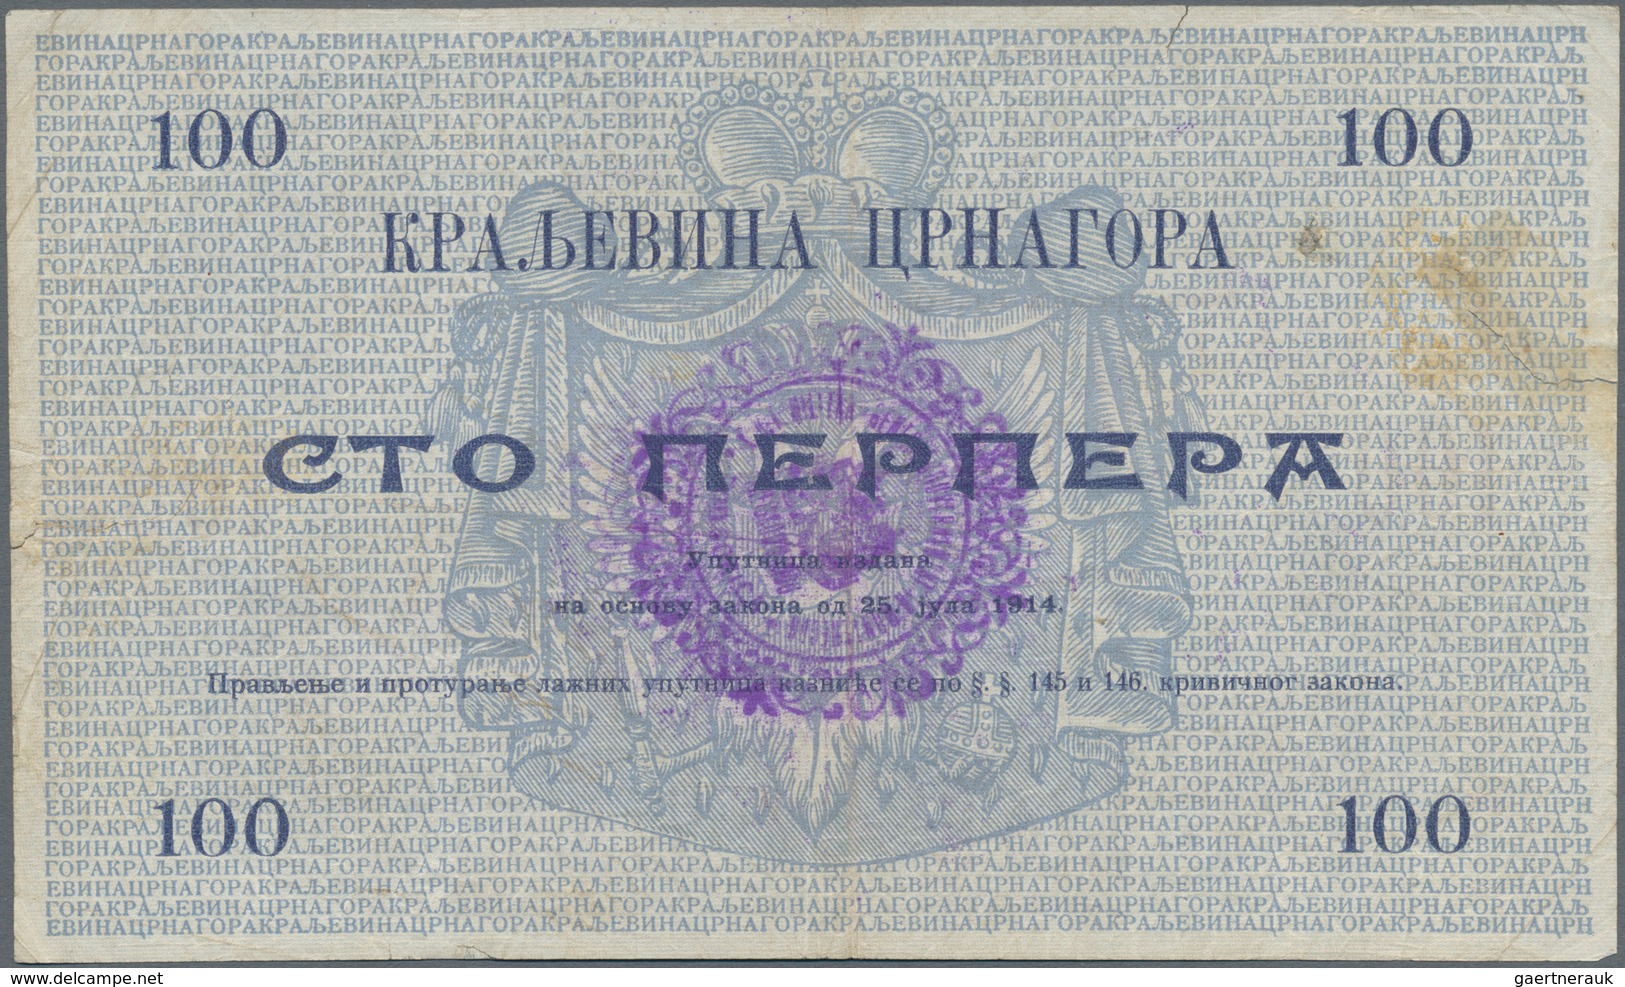 Montenegro: Very interesting with 10 banknotes of the Military Government District Command including